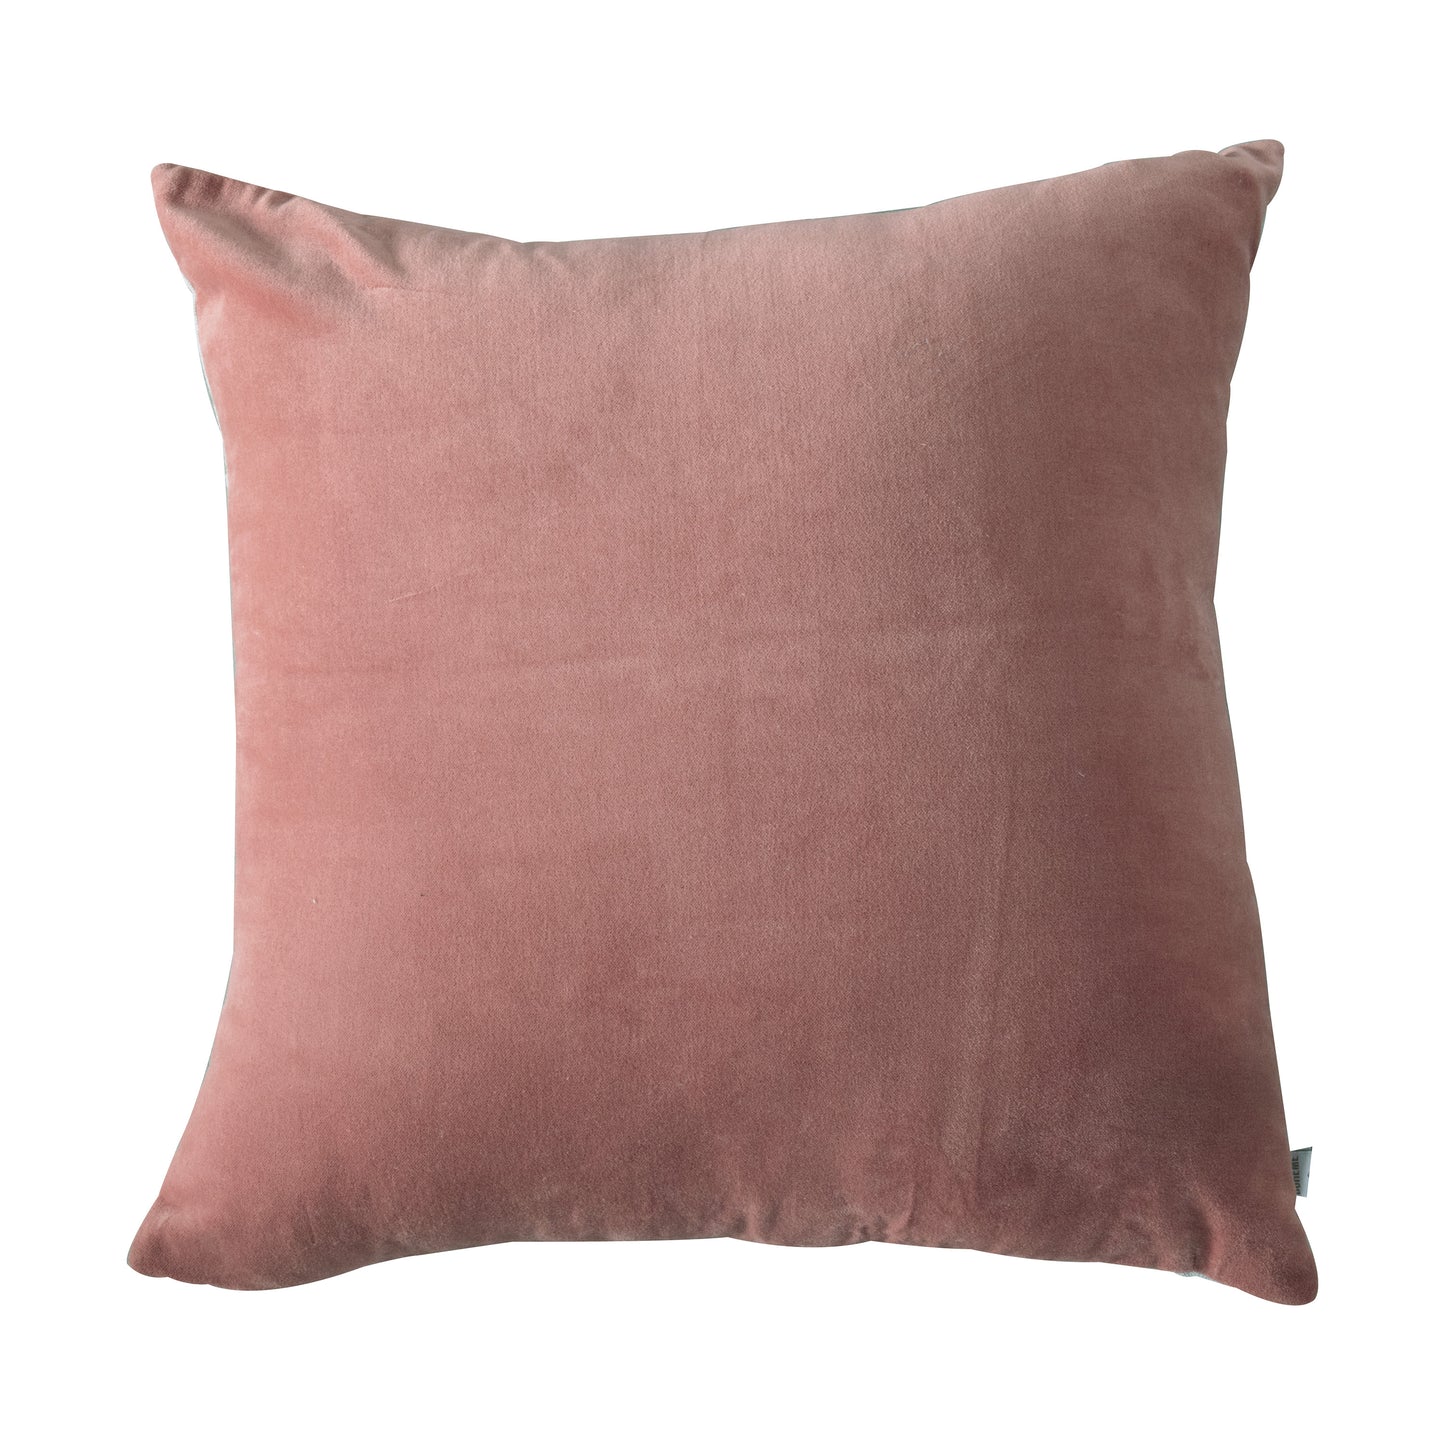 Load image into Gallery viewer, A Cotton Velvet Cushion Blush 500x500mm for interior decor by Kikiathome.co.uk on a white background.
